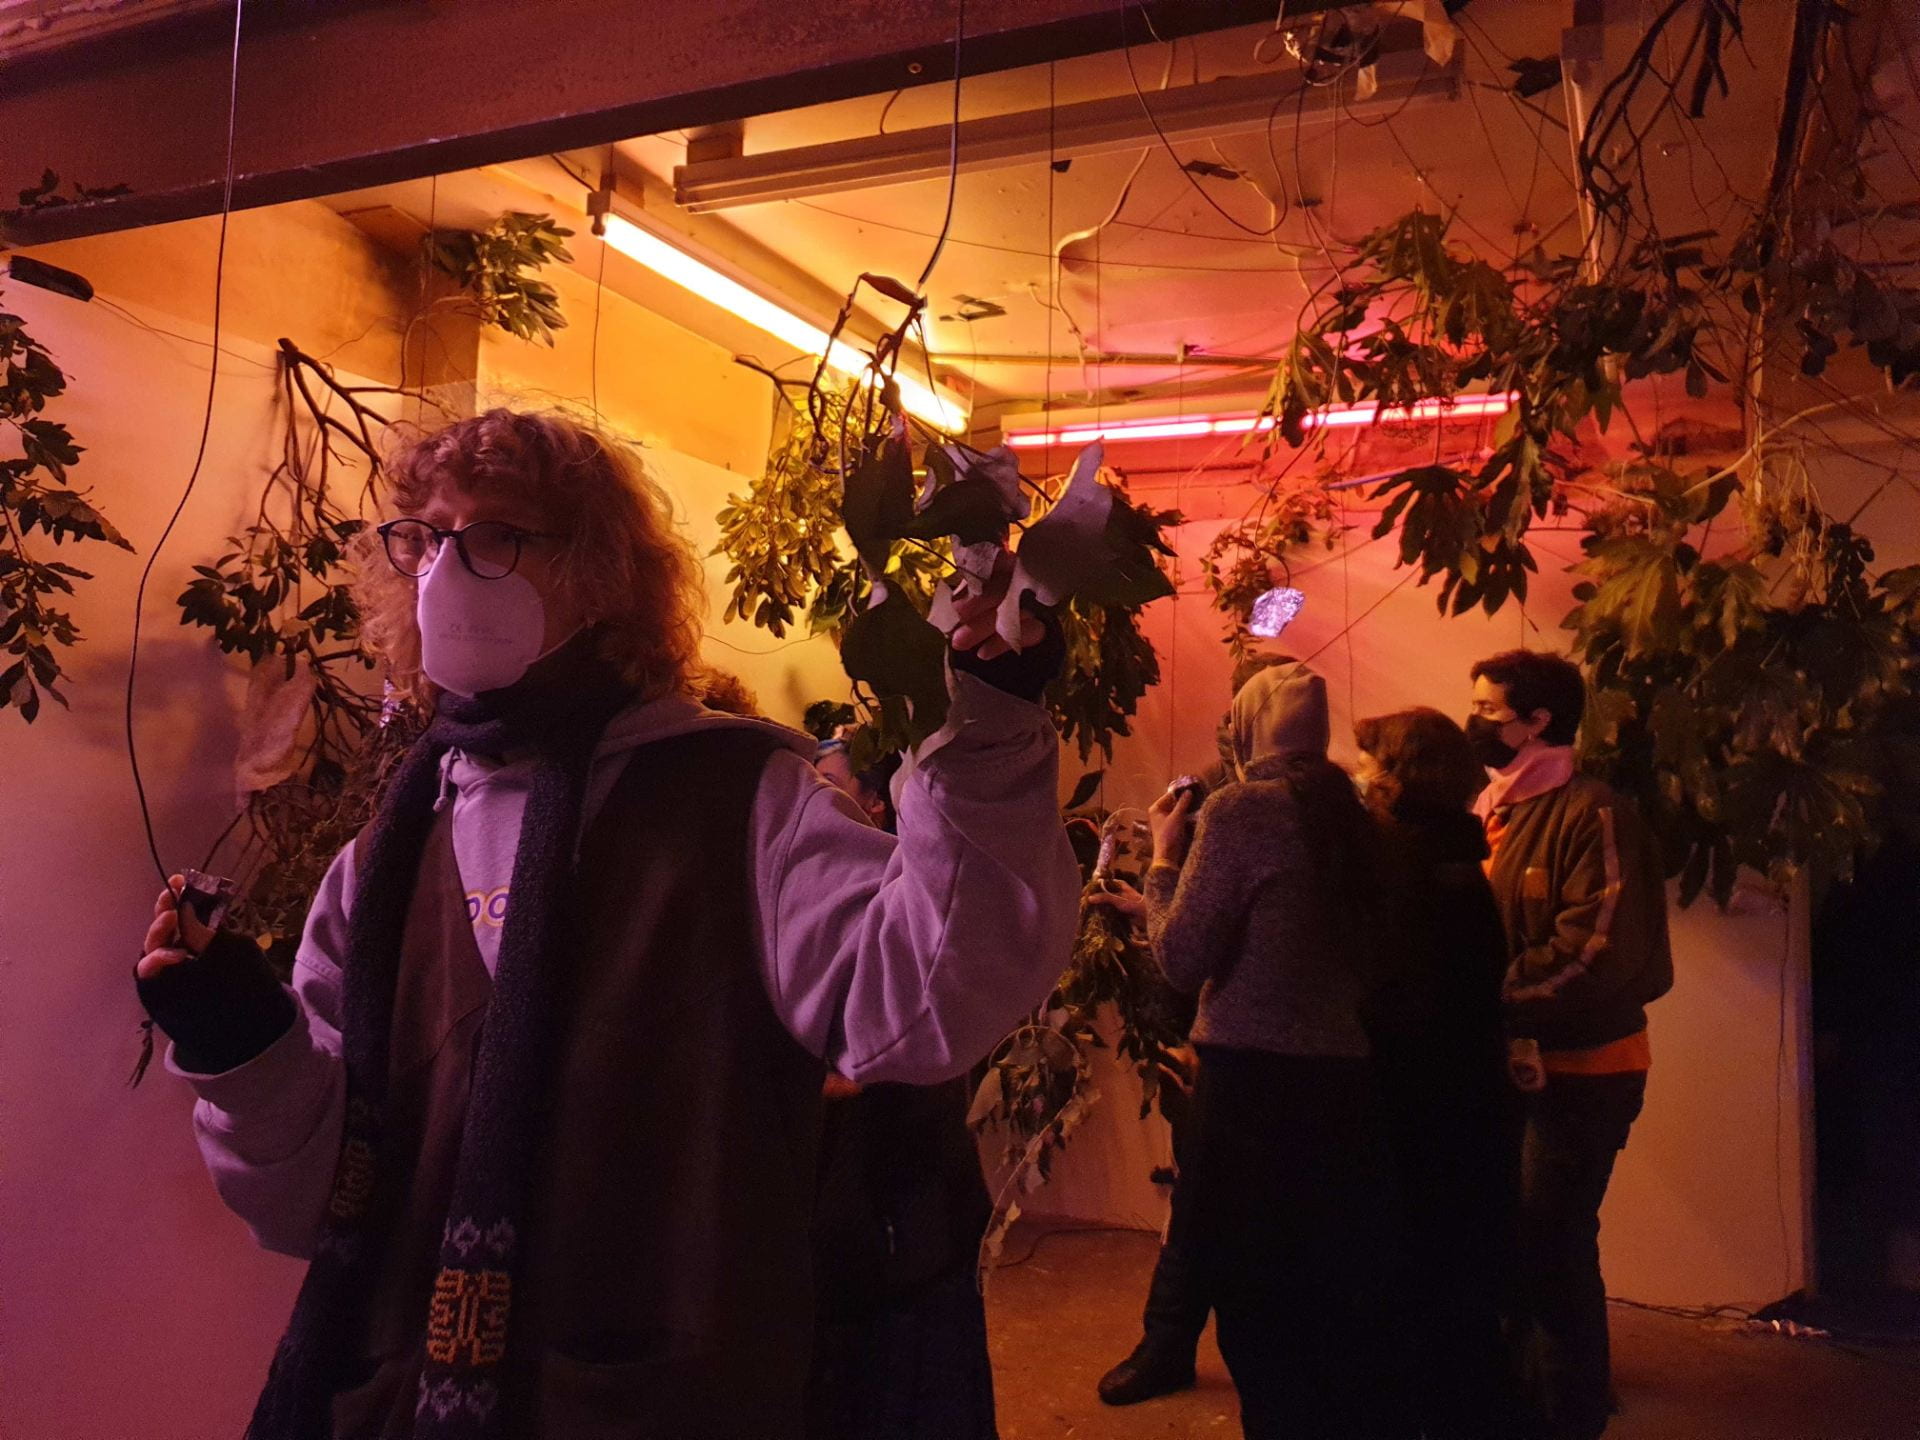 A performance event at Jupiter Woods, the gallery space is filled with hanging plants and a person holding leaves in the space.